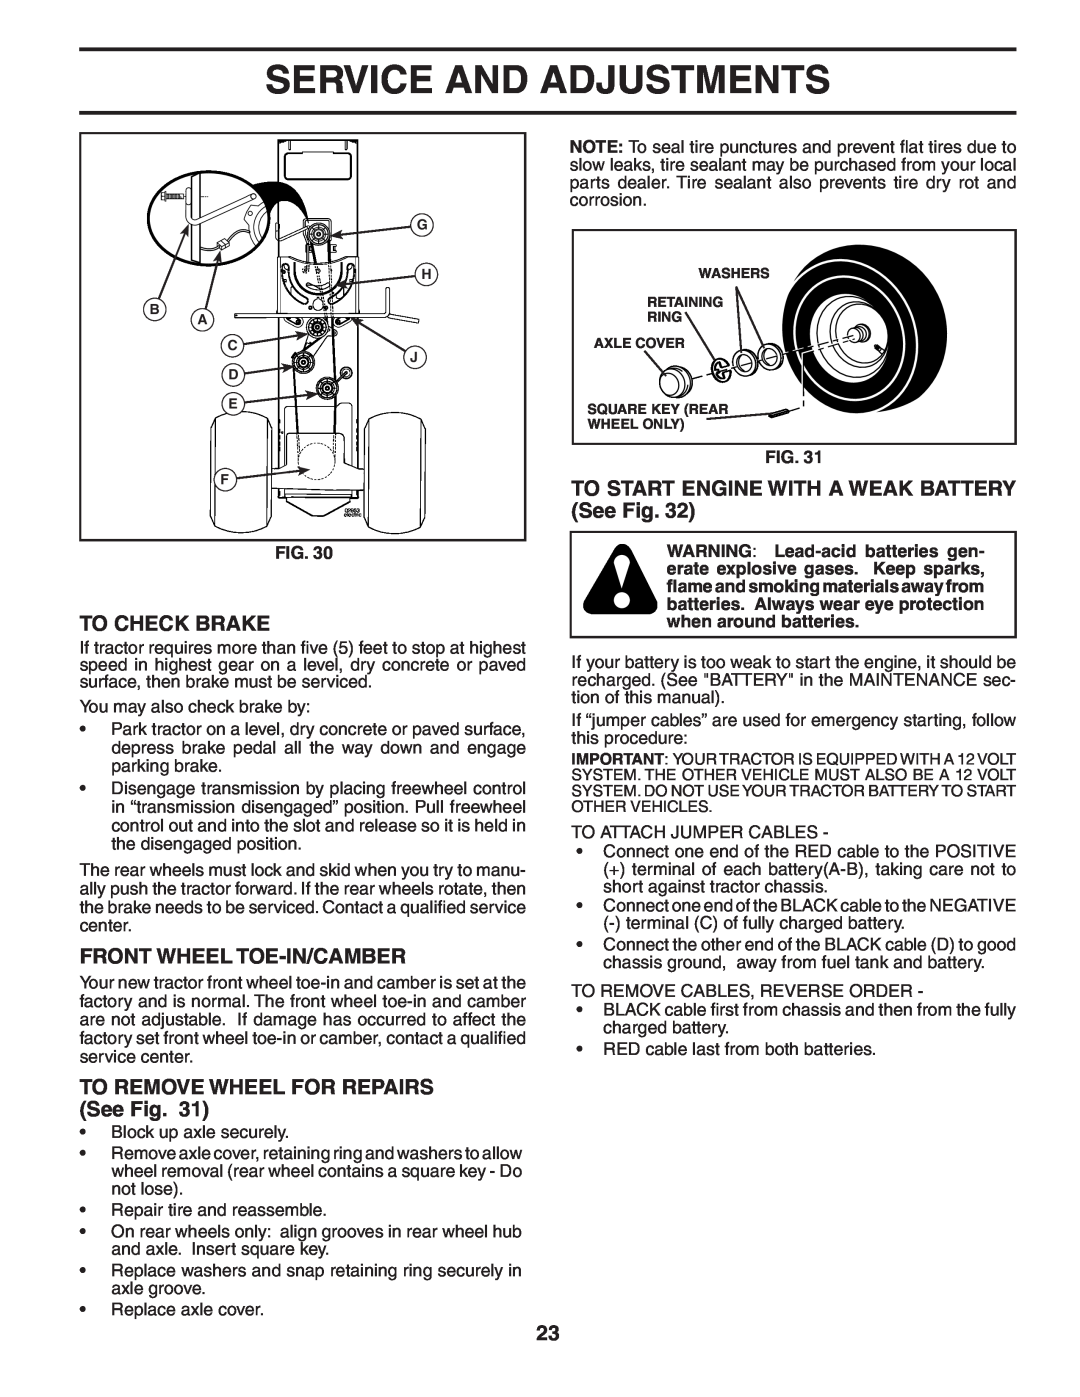 Poulan 960420022 To Check Brake, Front Wheel Toe-In/Camber, TO REMOVE WHEEL FOR REPAIRS See Fig, Service And Adjustments 